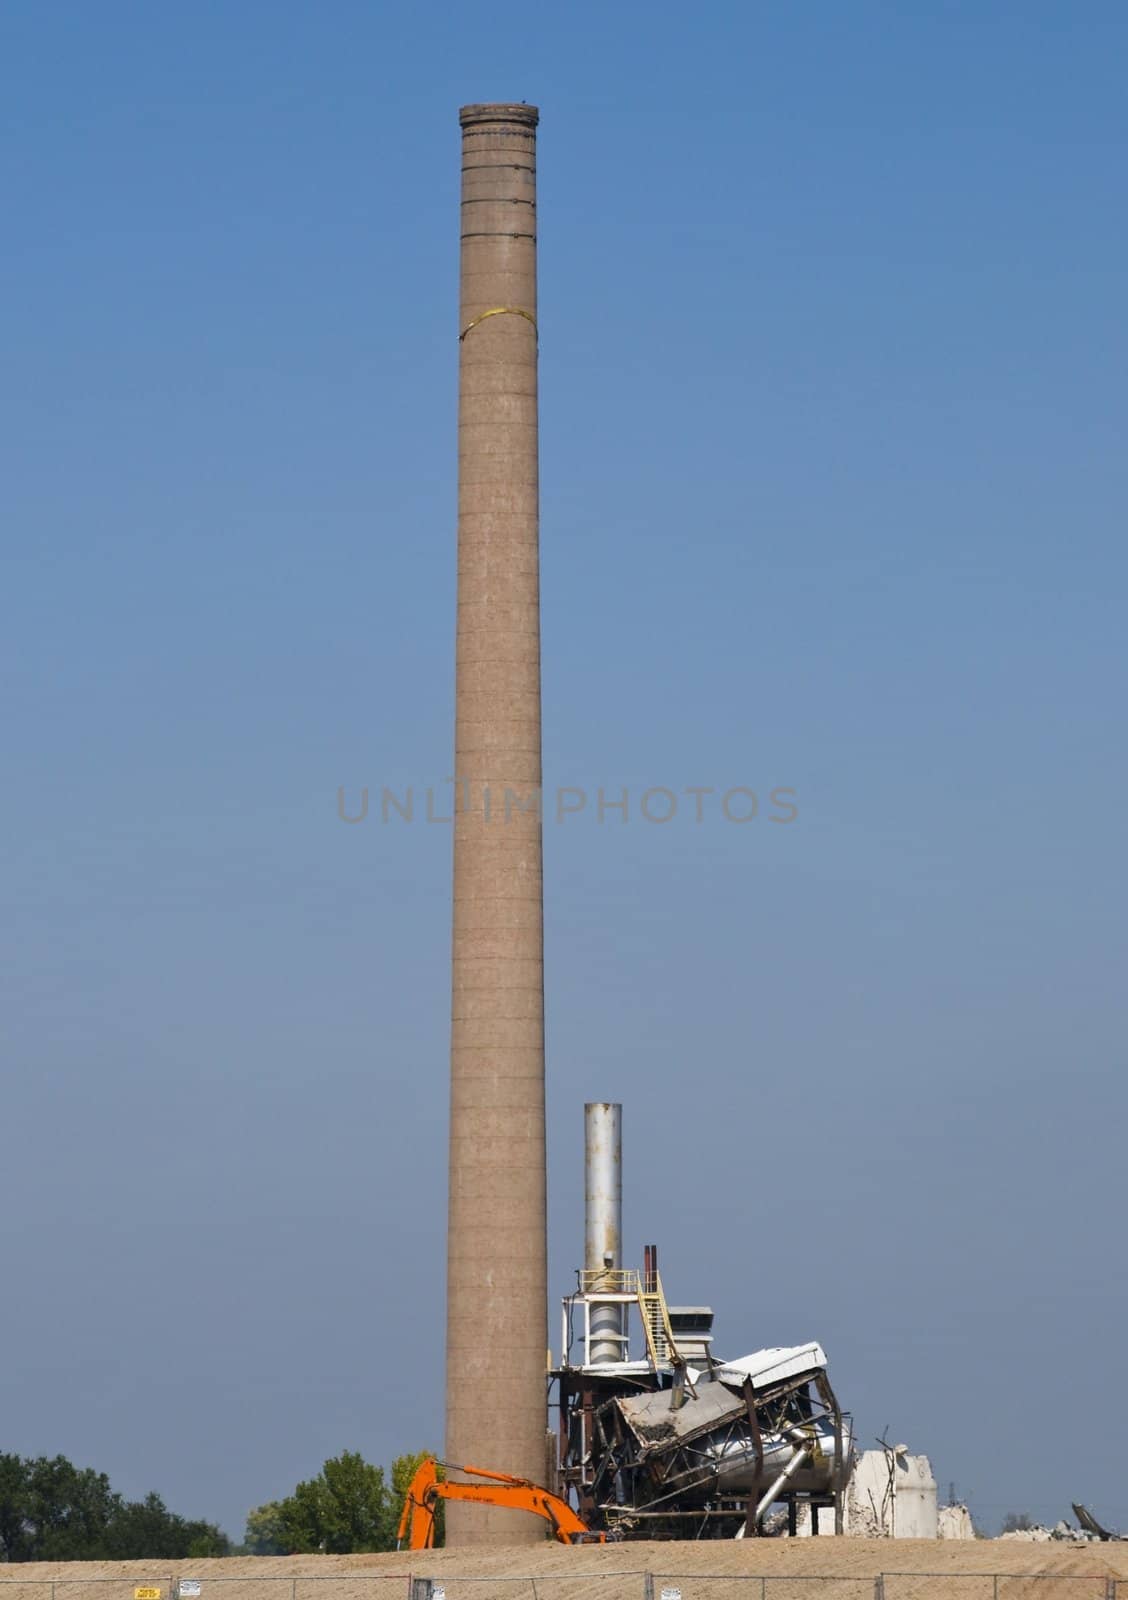 Old smoke stack, the only thing left as an old factory is demolished.